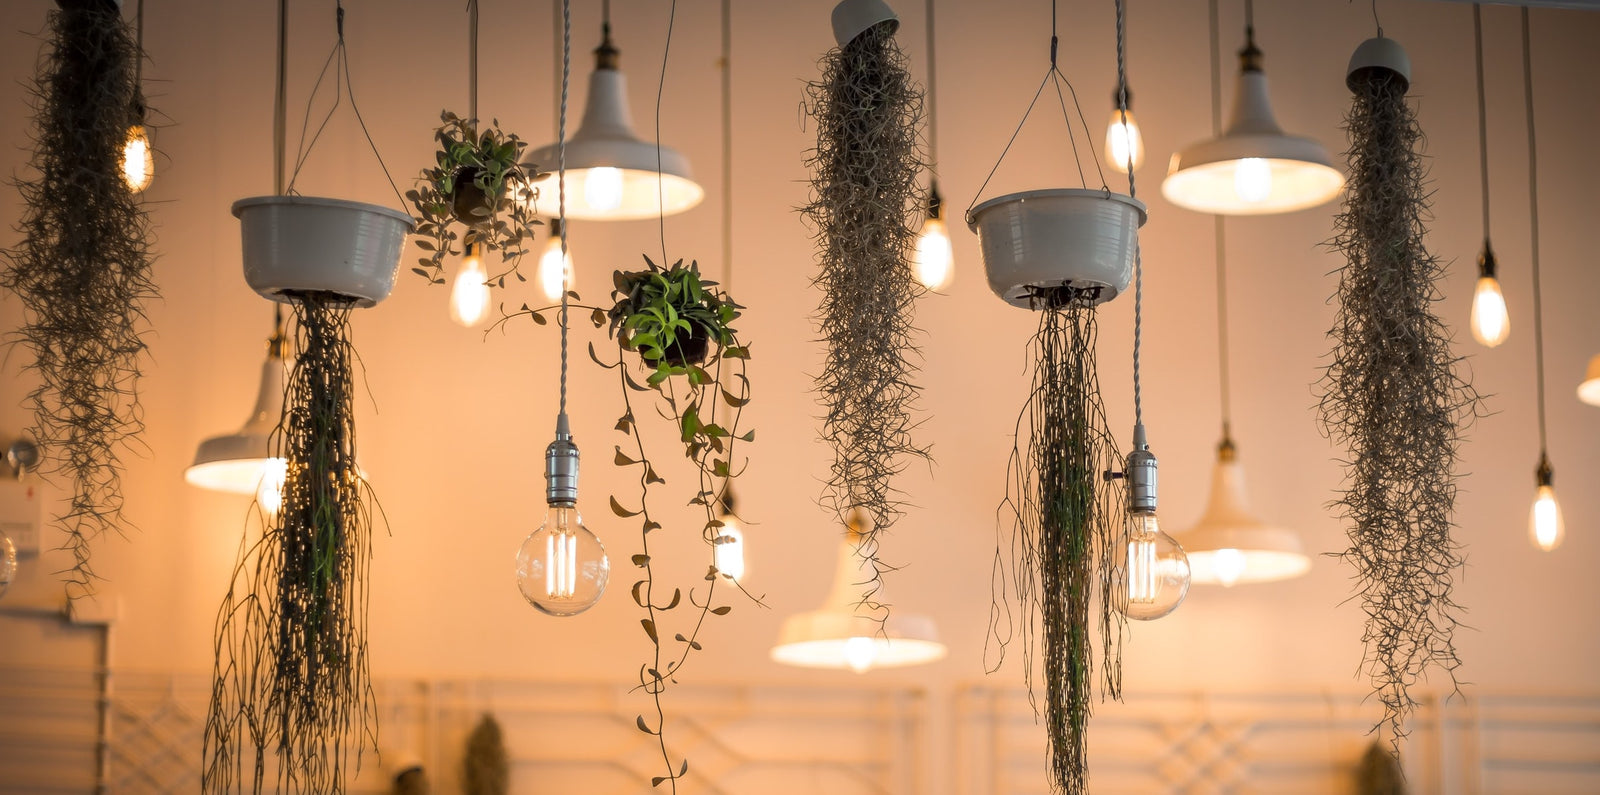 Lightbulbs hanging on power cords with suspended plants